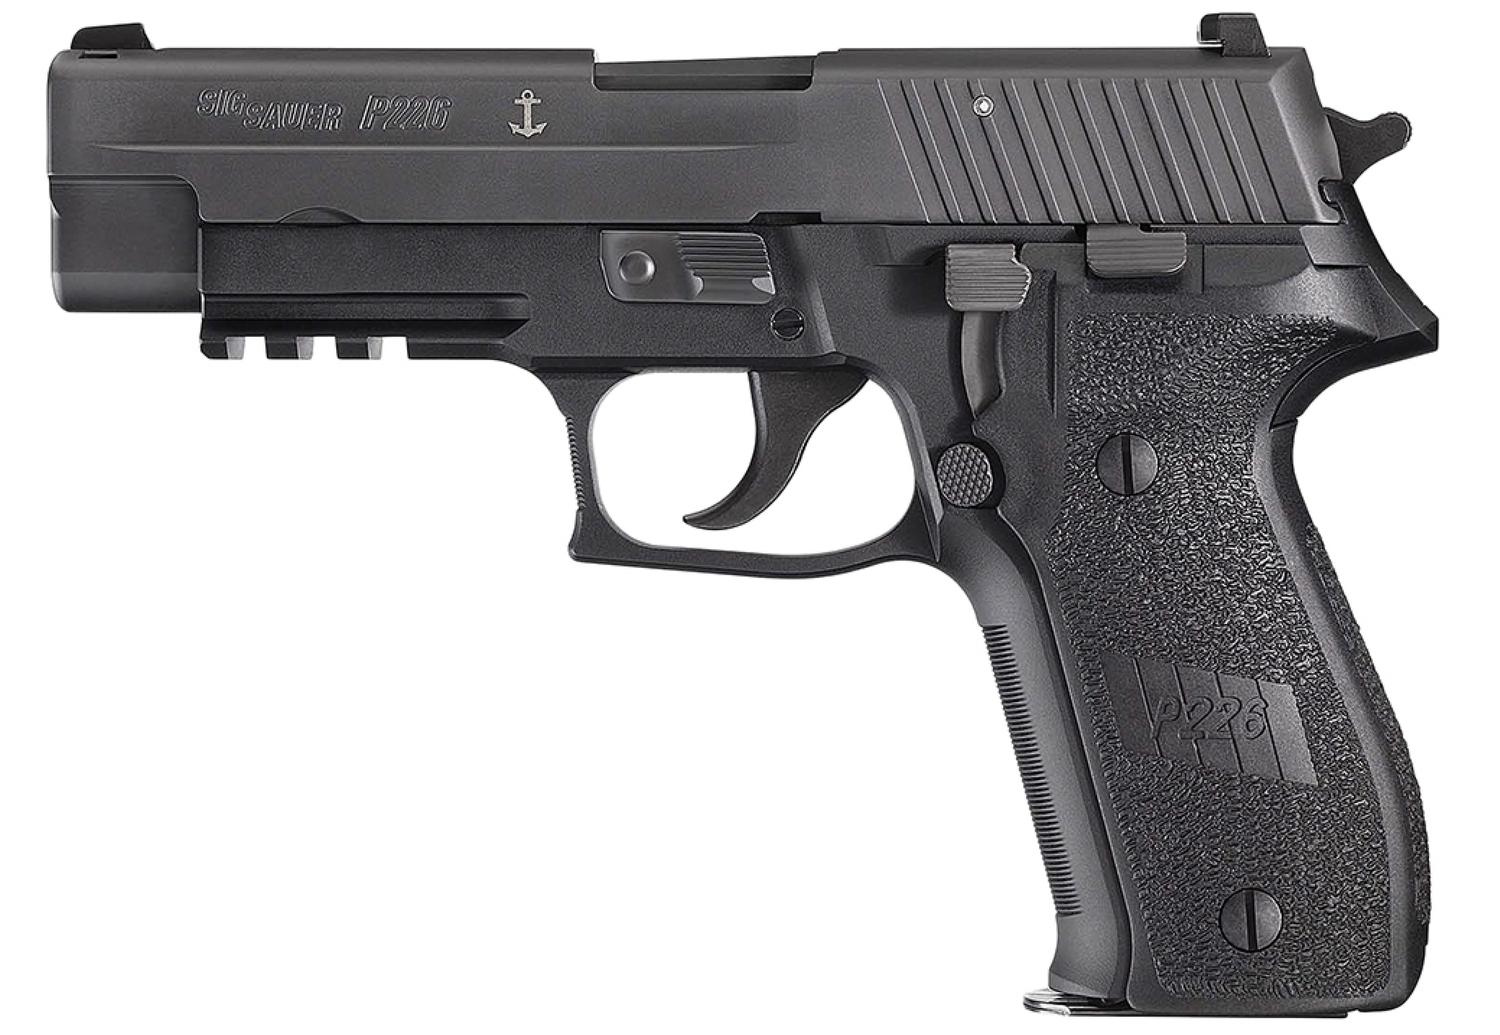  P226r Mk- 25 9mm 4.4in W/3 Mags & Night Sights